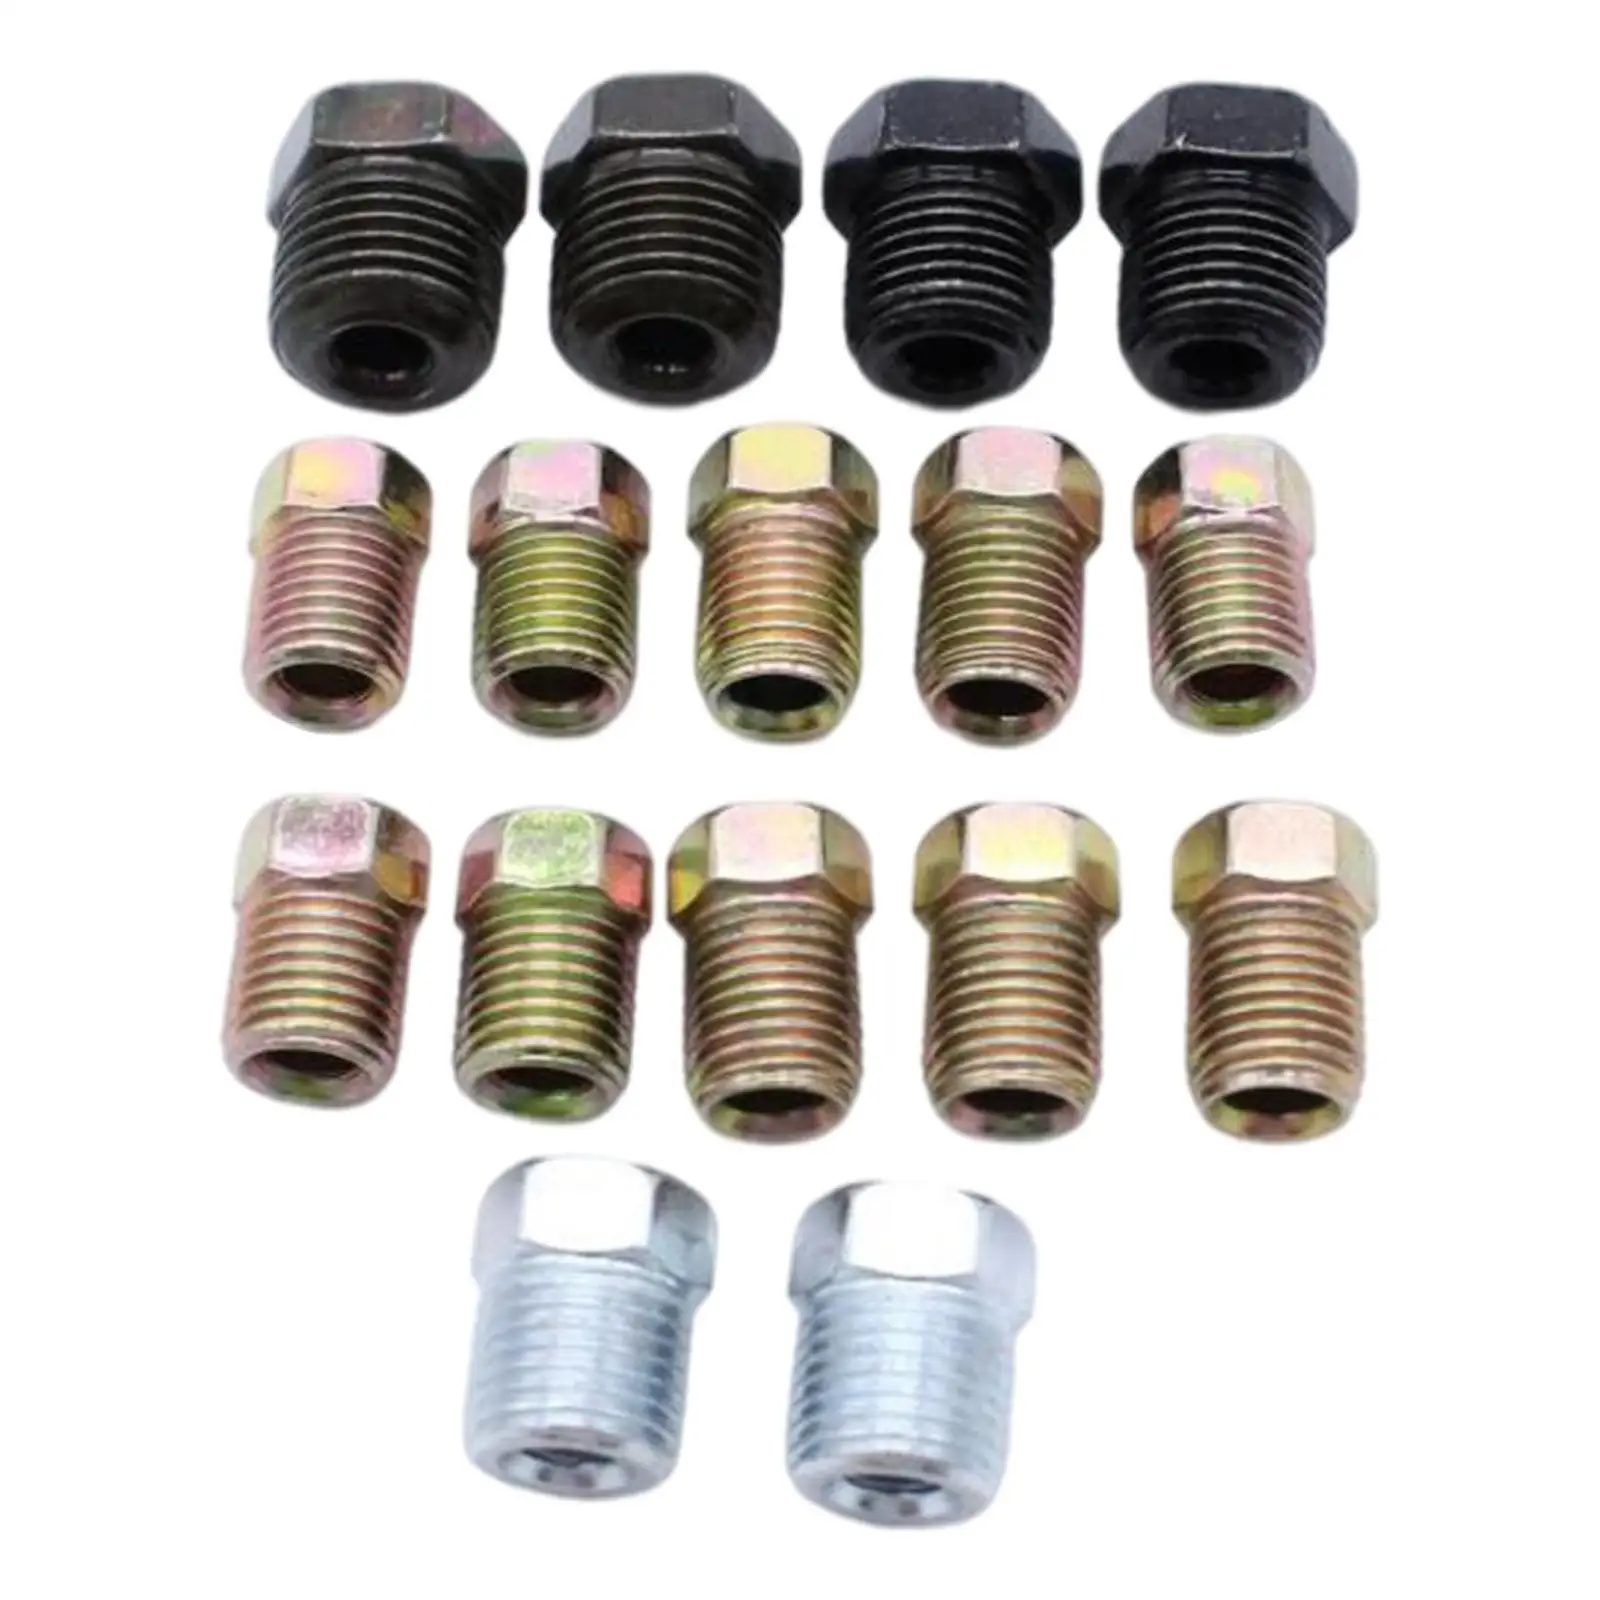 16-Pack Inverted Flare Tube Nuts Fit for 3/16 inch Tube Brake Line Systems